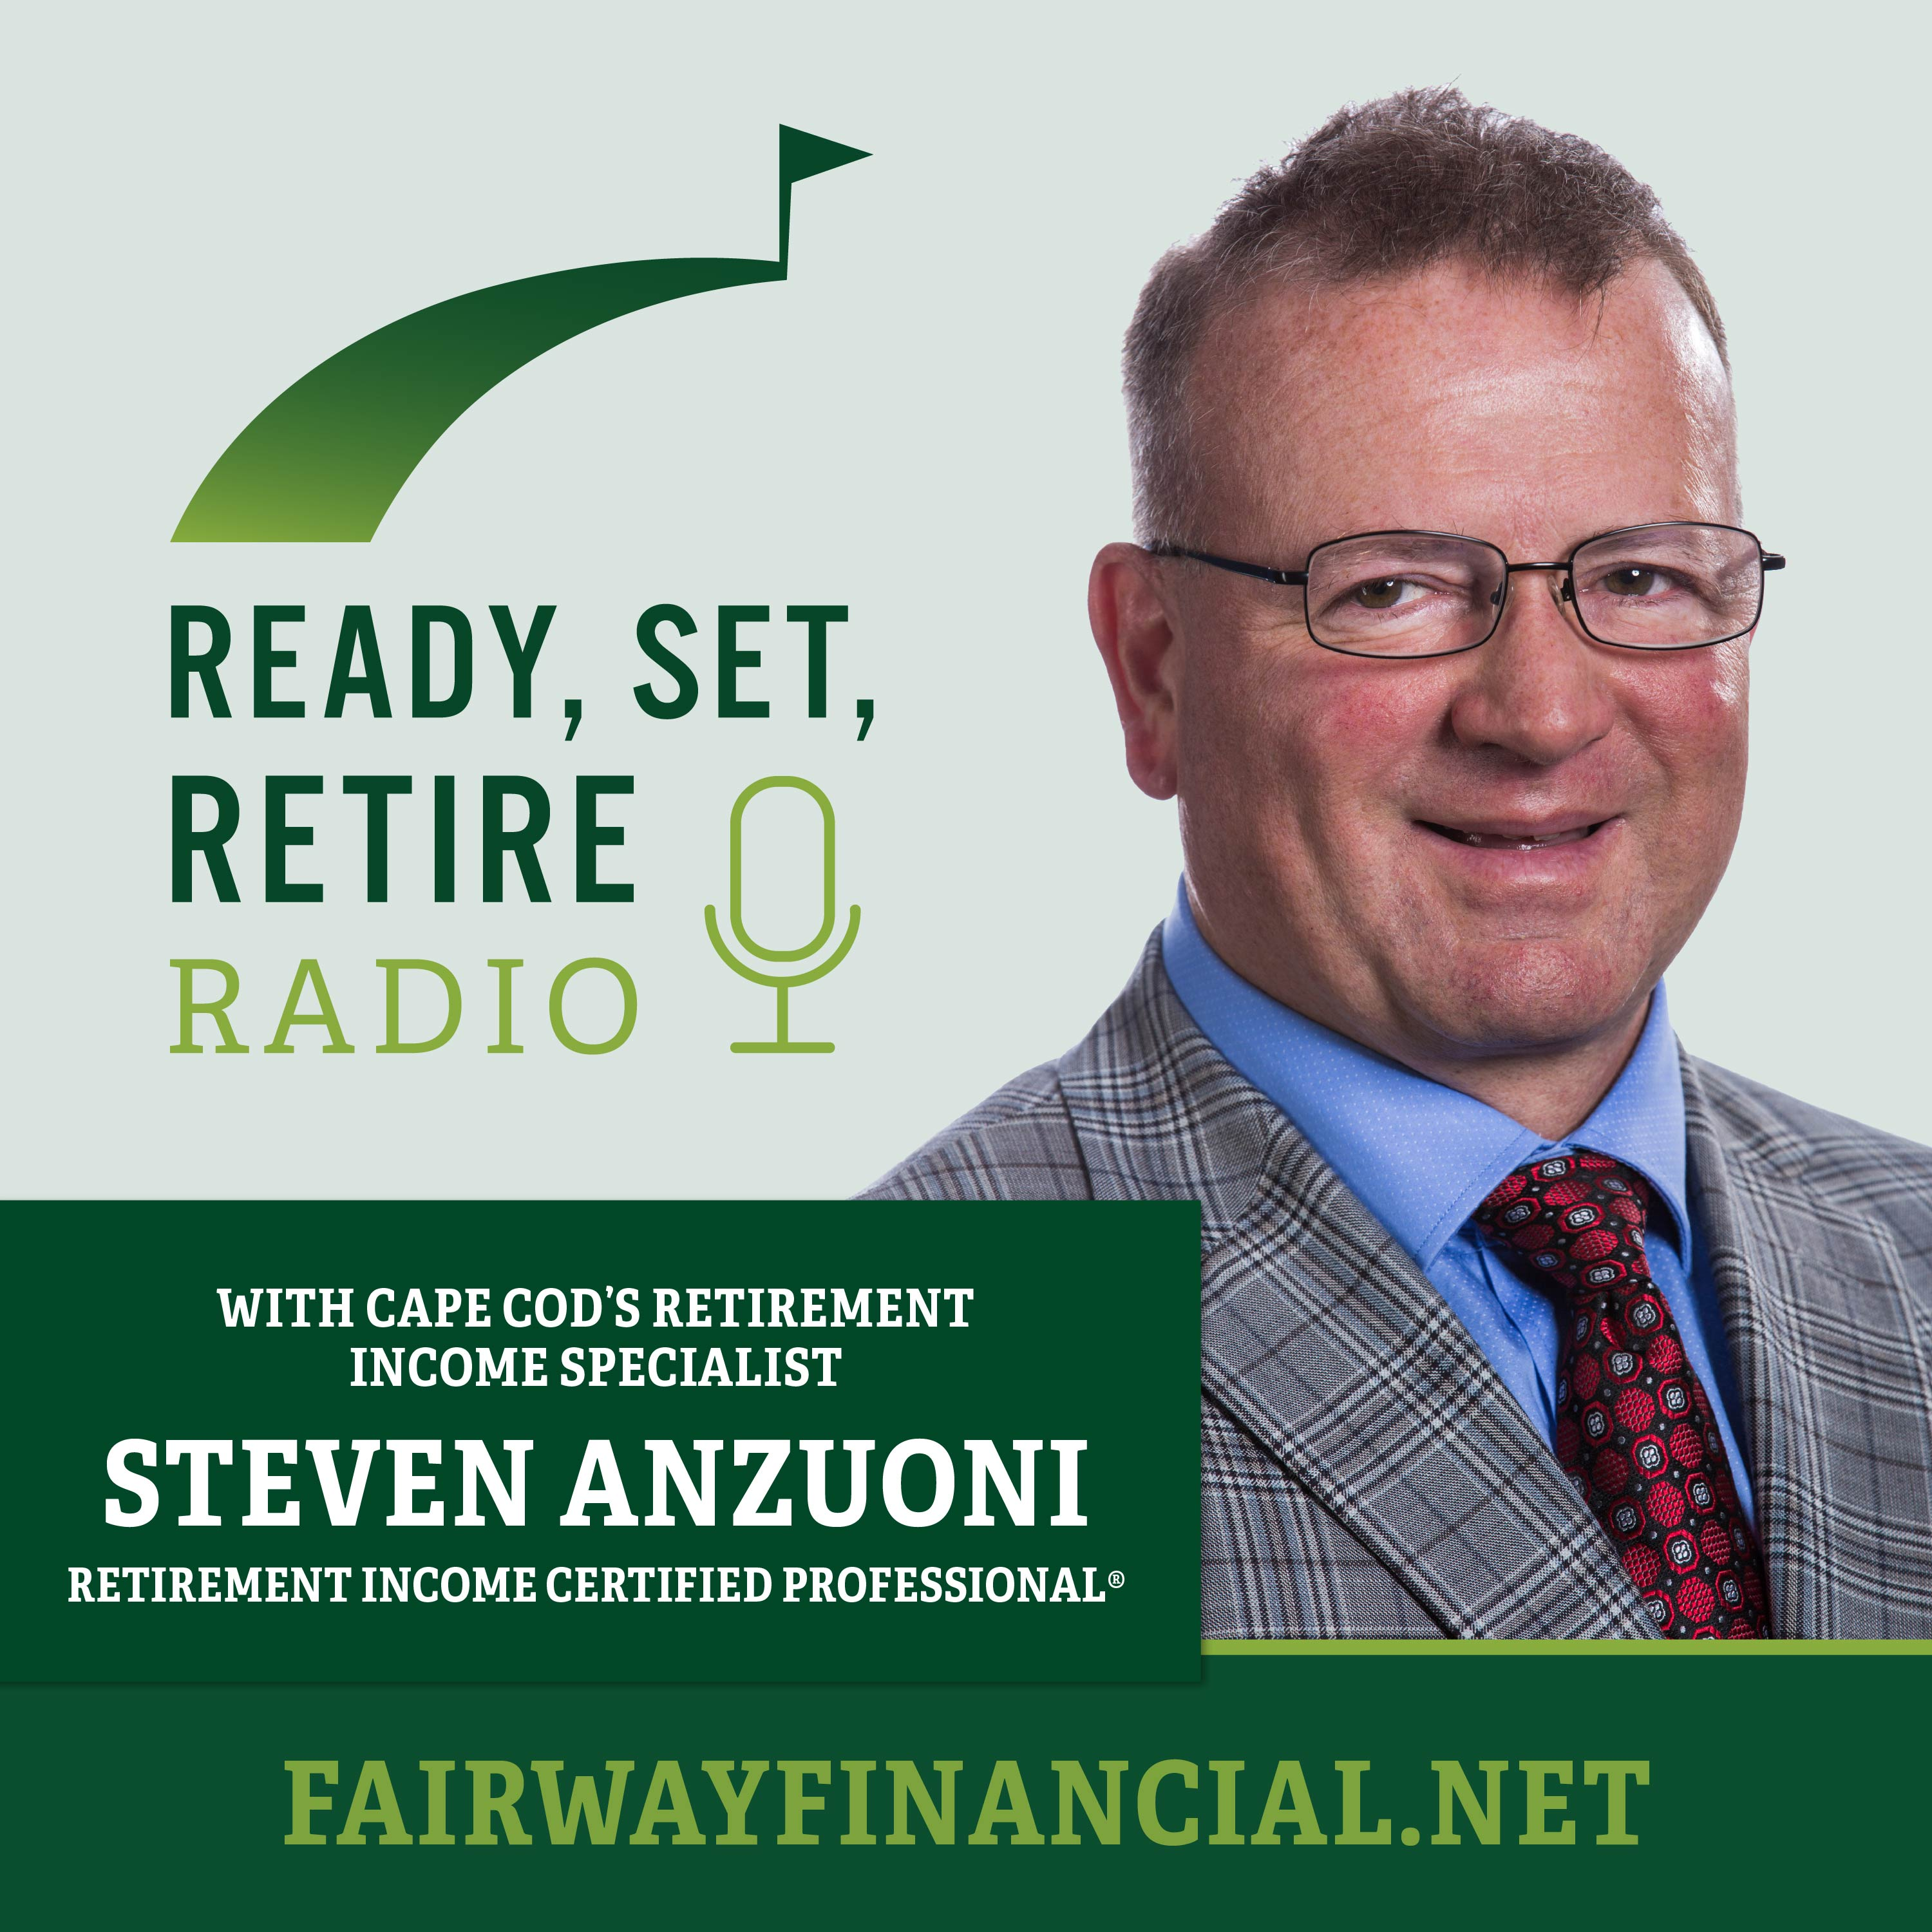 When Will You and CAN You Retire?